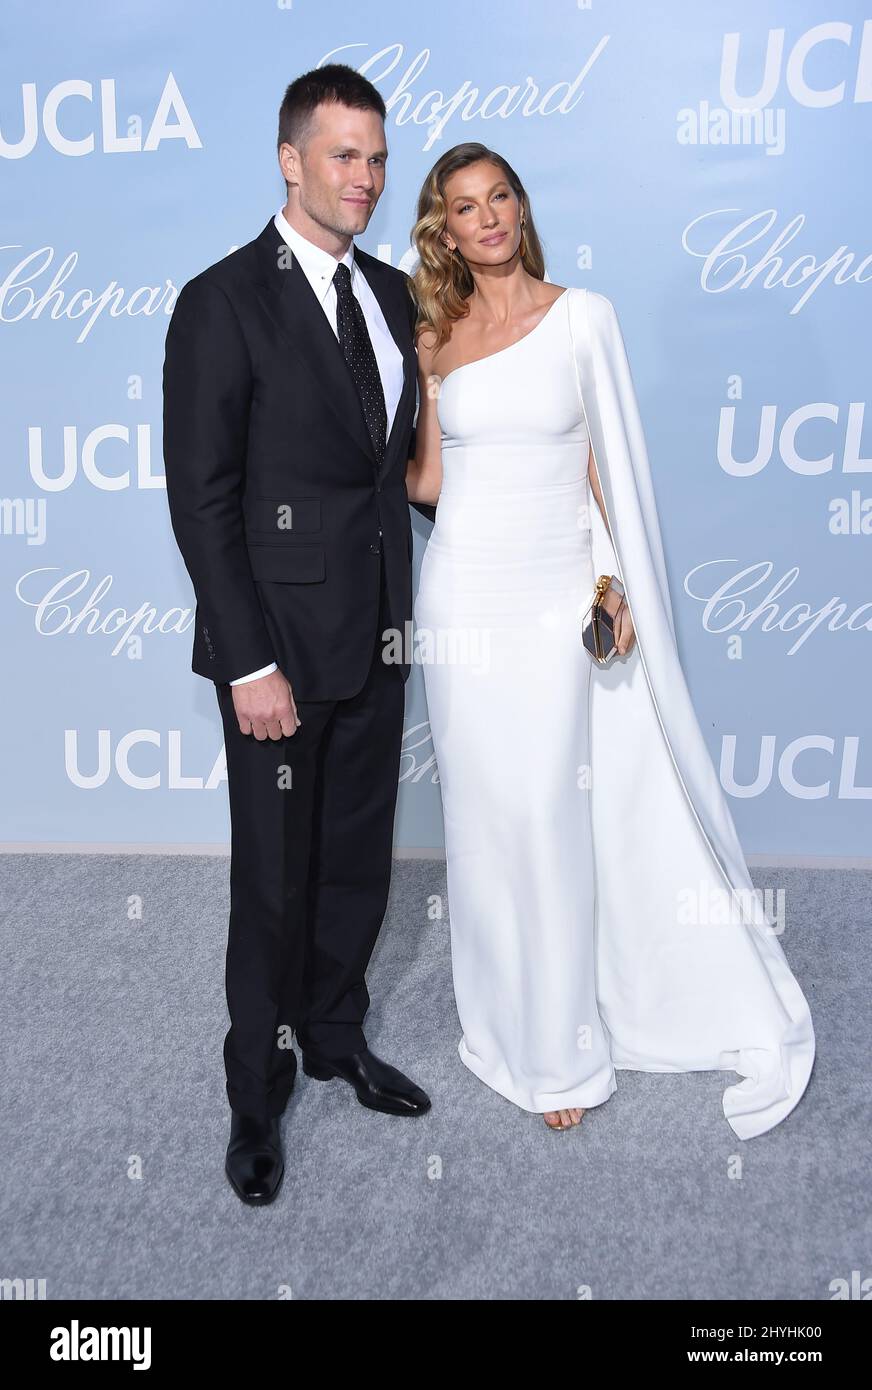 Tom Brady and Gisele Bundchen attending the Hollywood For Science gala in Los Angeles, California Stock Photo